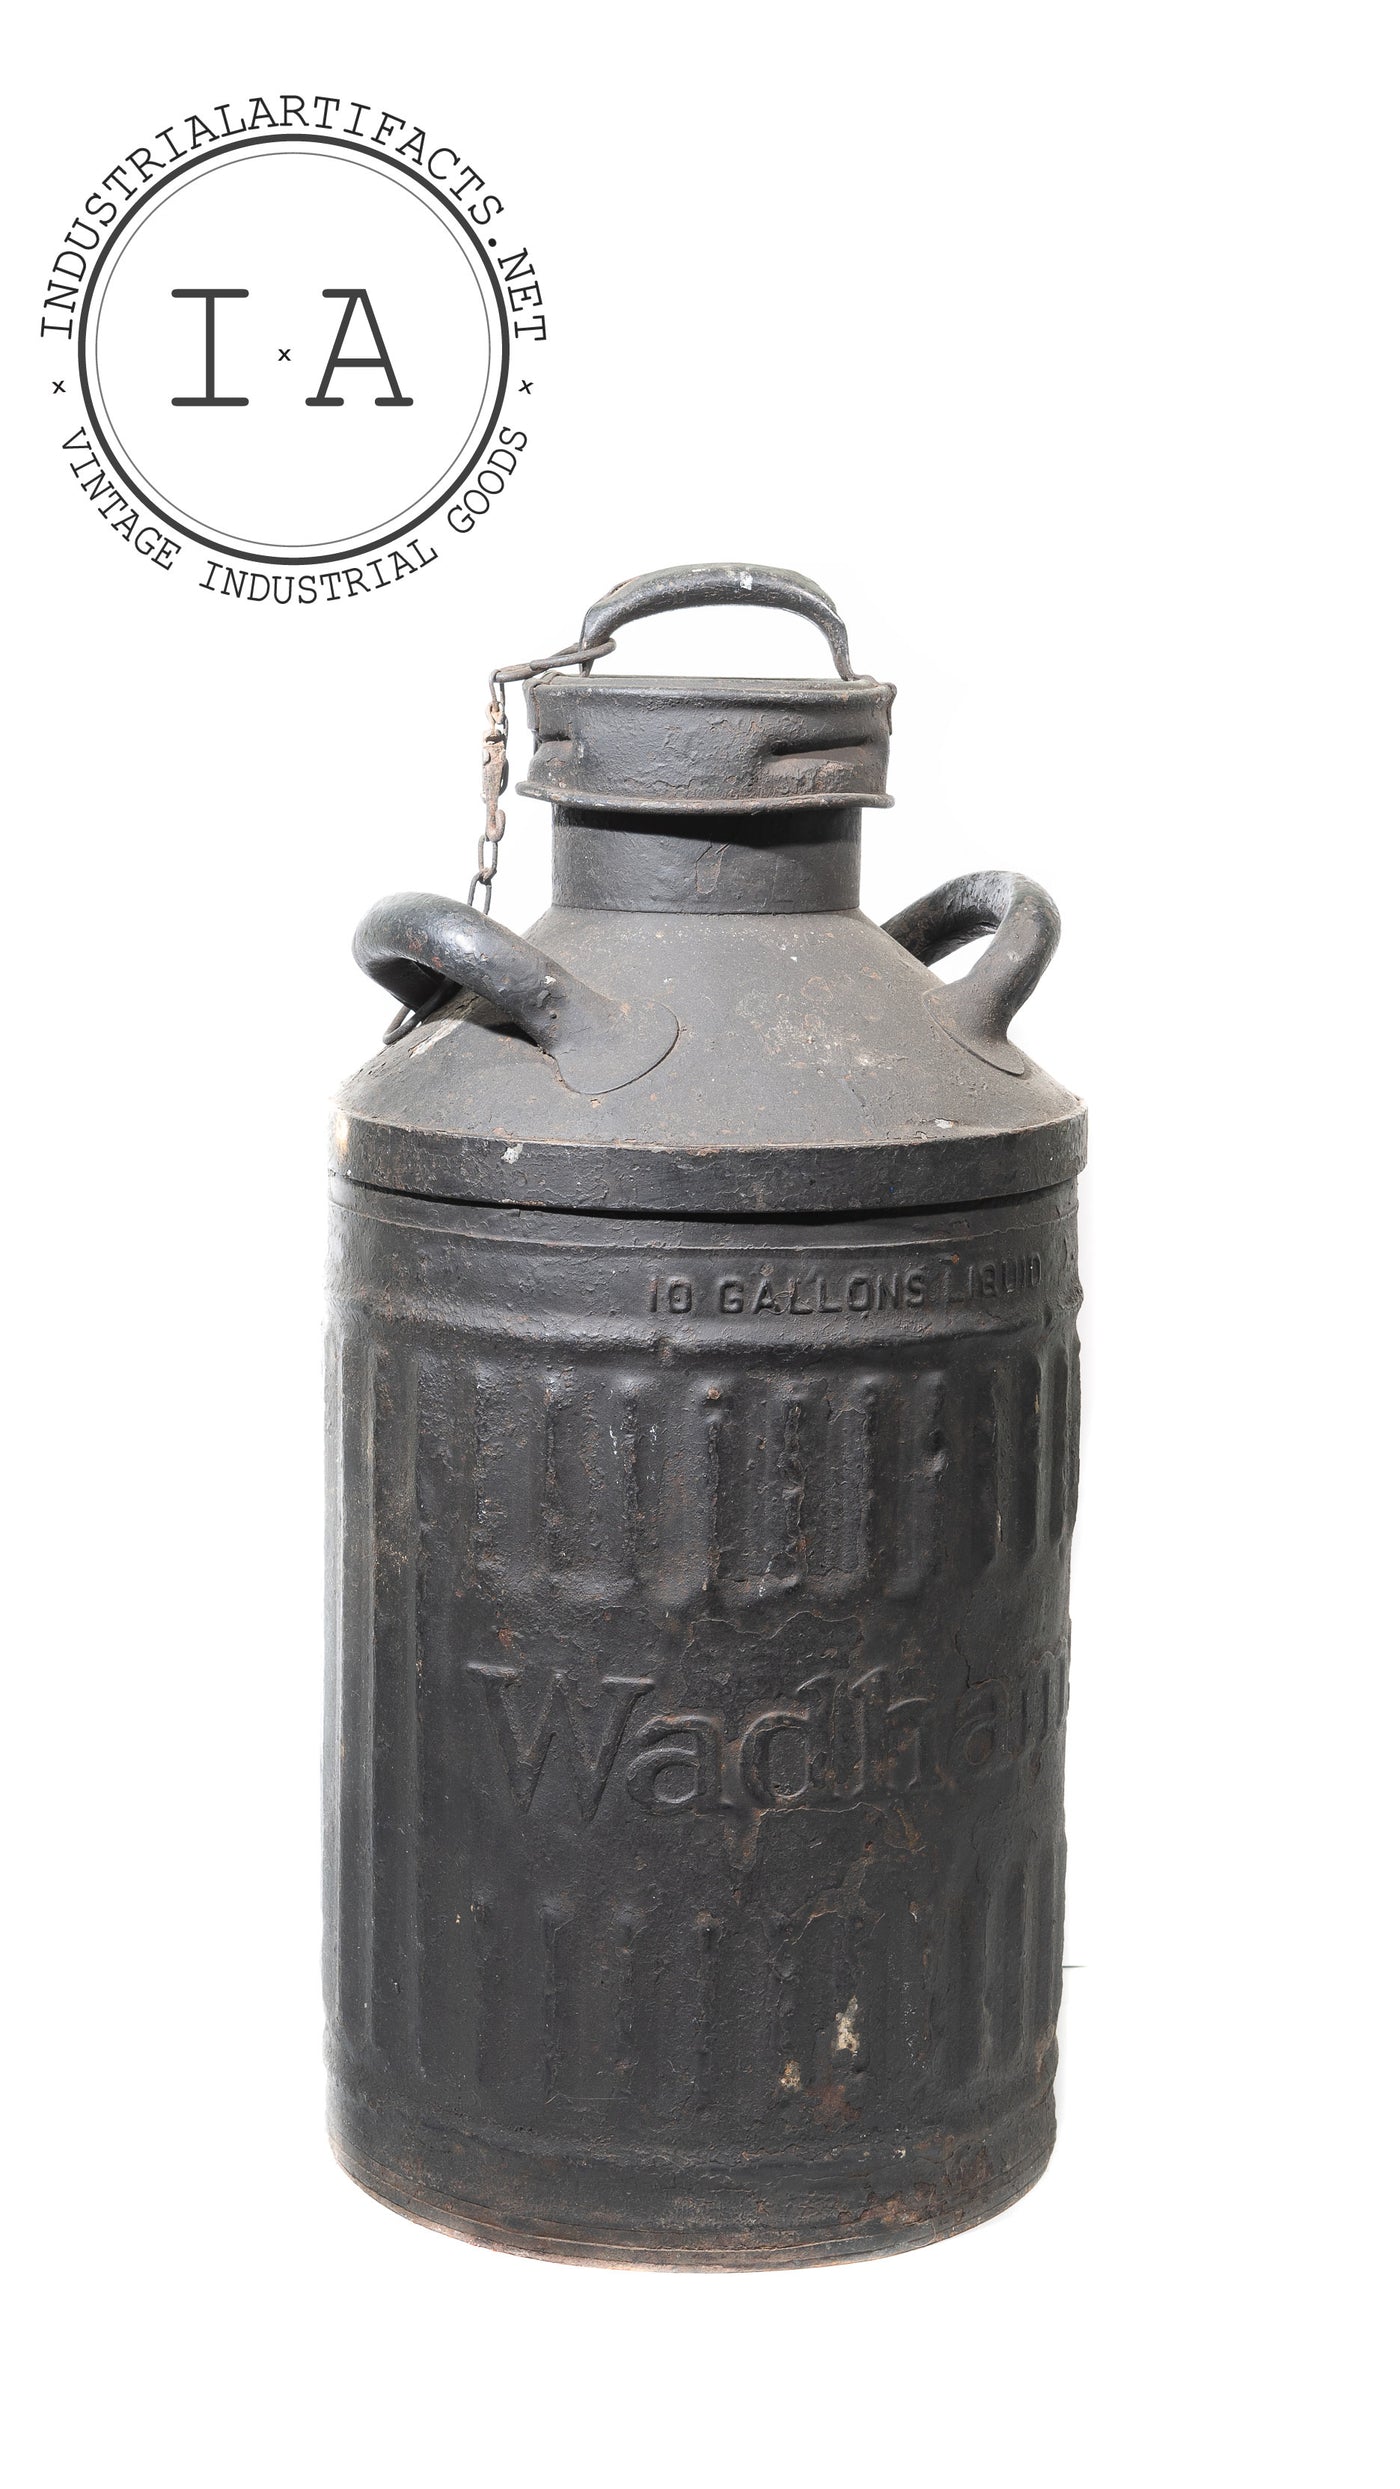 Wadham's Oil And Grease Company 10 Gallon Container